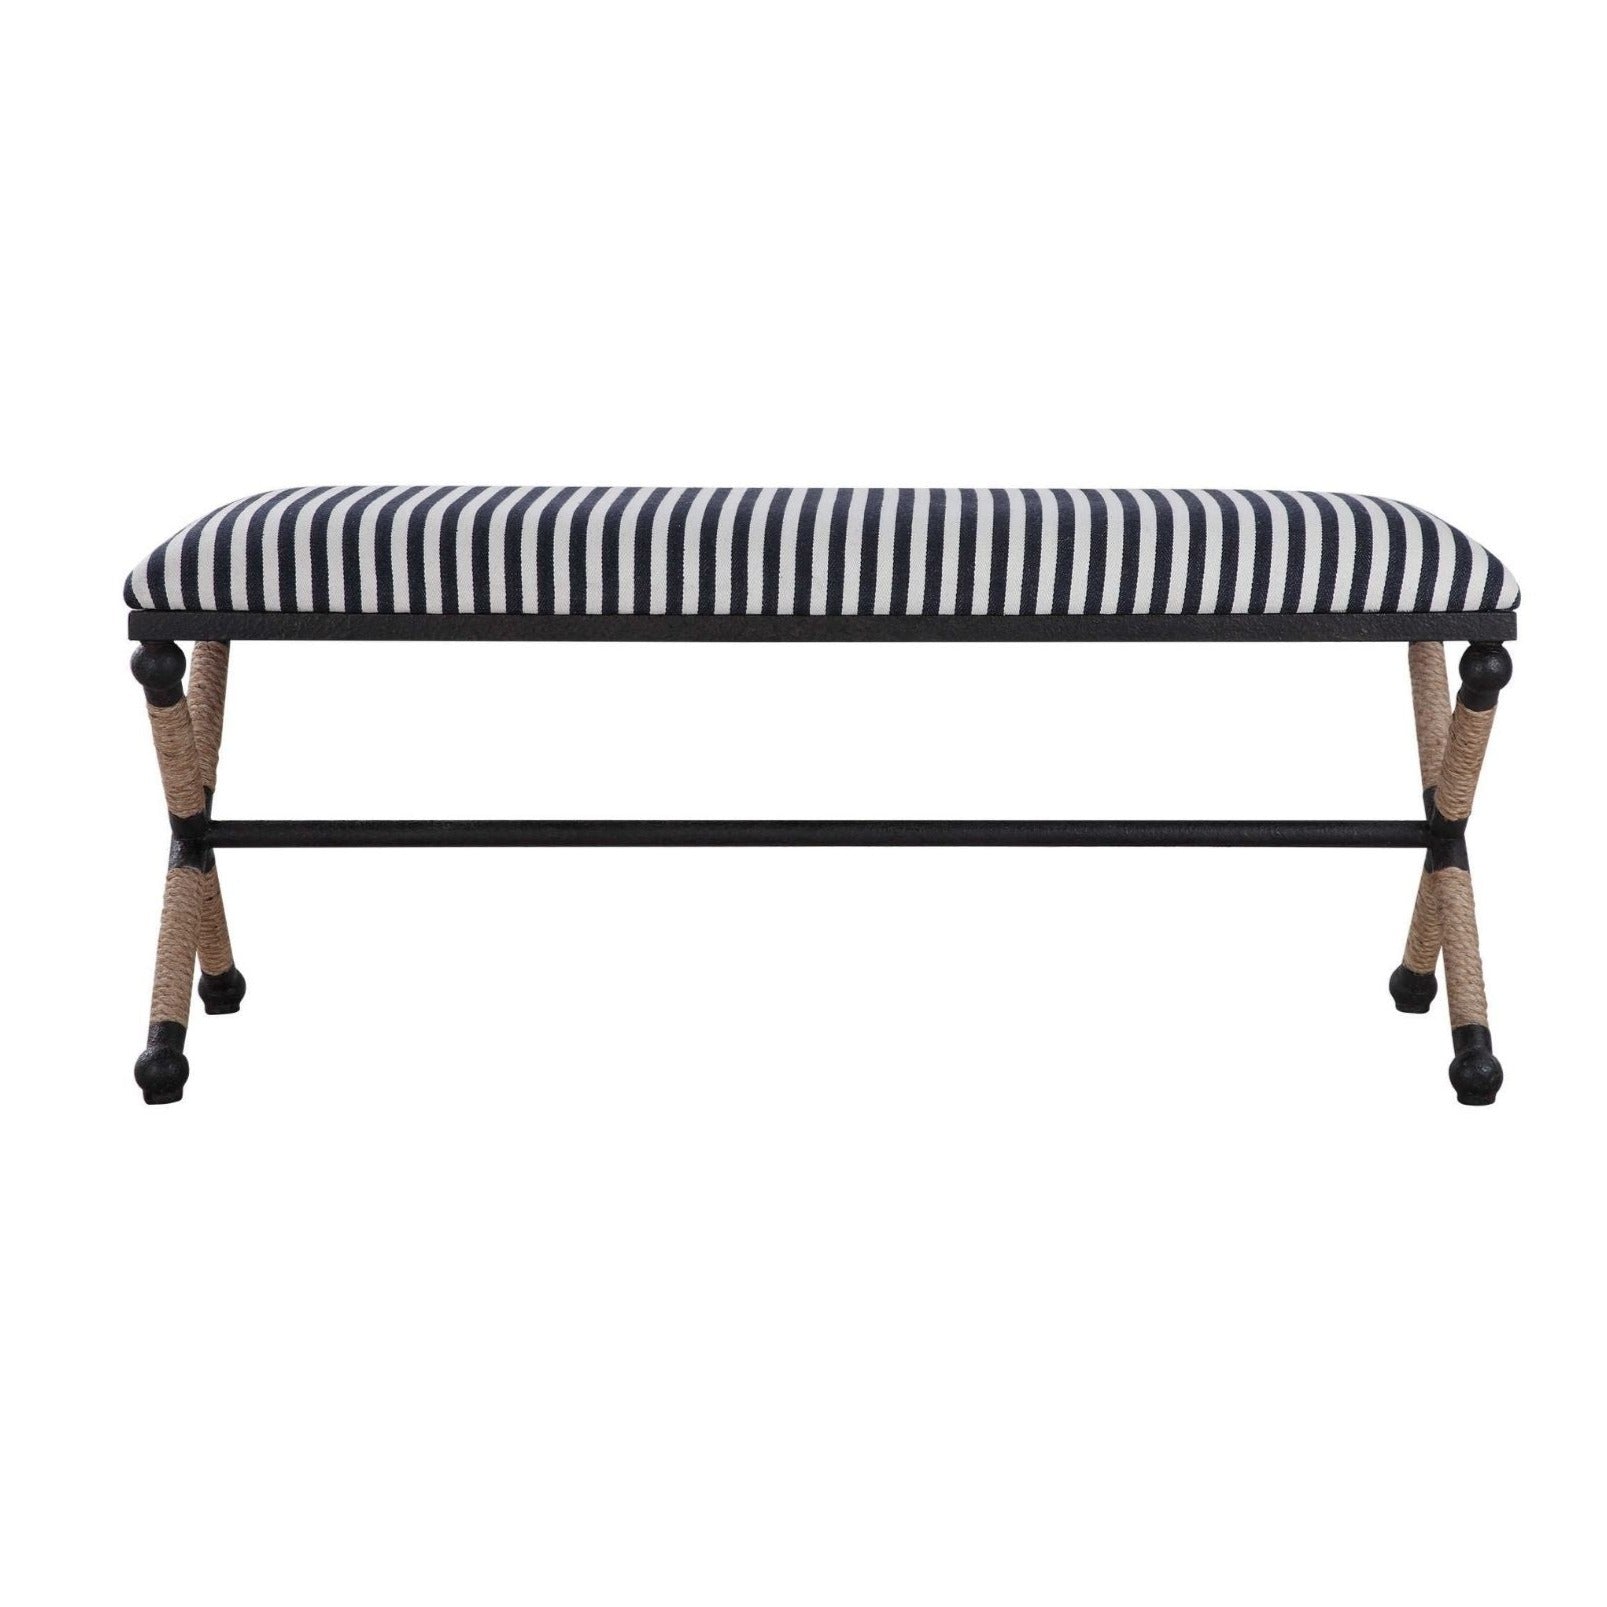 A bench with rustic iron is accented by a cushioned top, a sturdy sailor-striped cotton in crisp navy and cream.